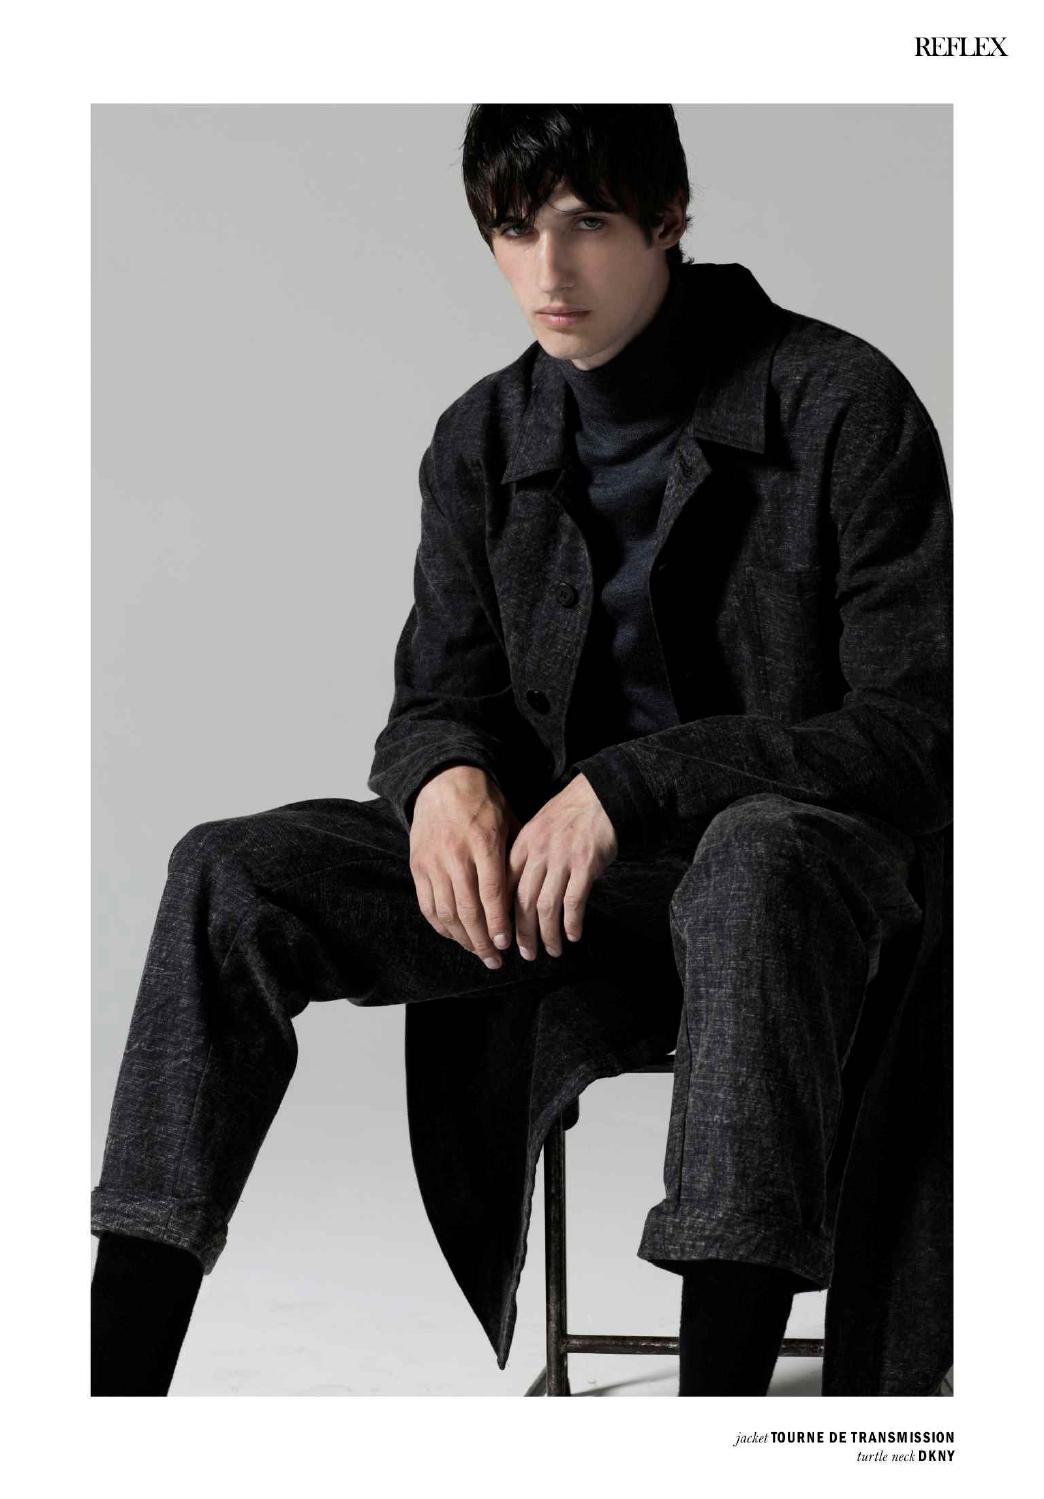 Ian Sharp is Chic & Sporty for Reflex Homme Spread